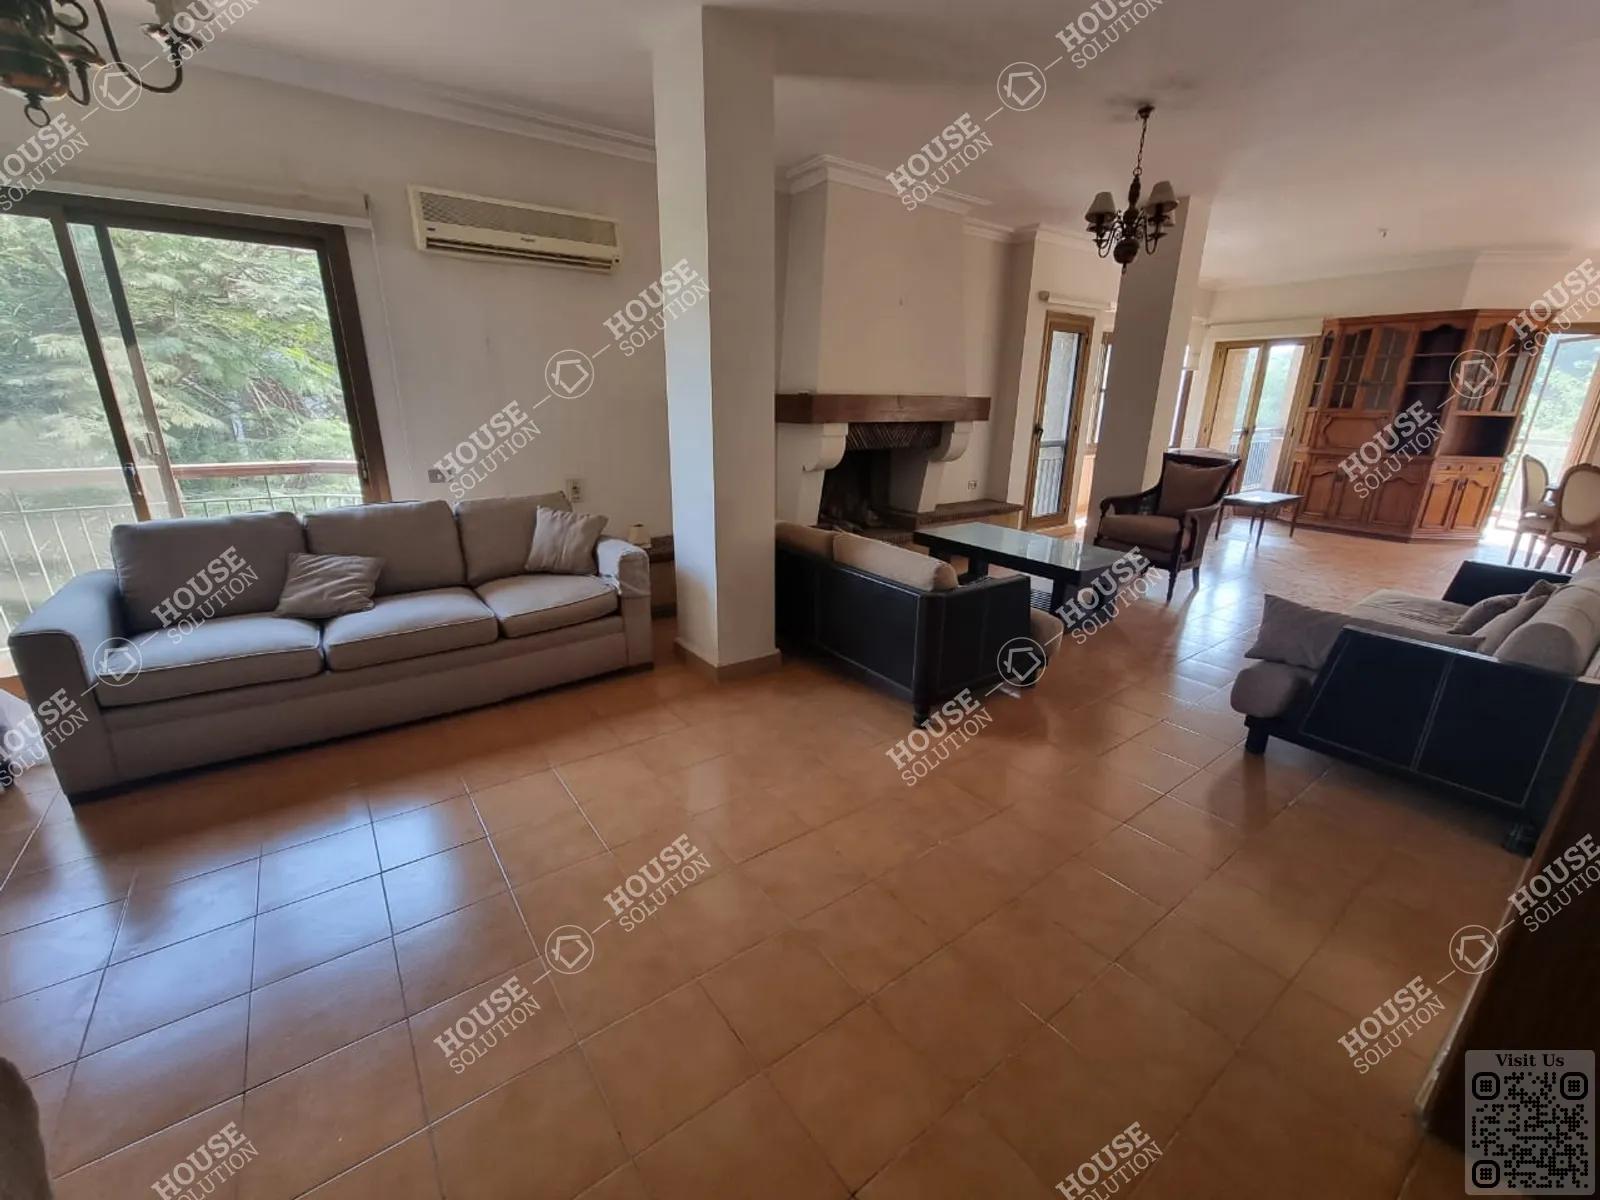 RECEPTION  @ Apartments For Rent In Maadi Maadi Sarayat Area: 180 m² consists of 3 Bedrooms 2 Bathrooms Furnished 5 stars #5889-0